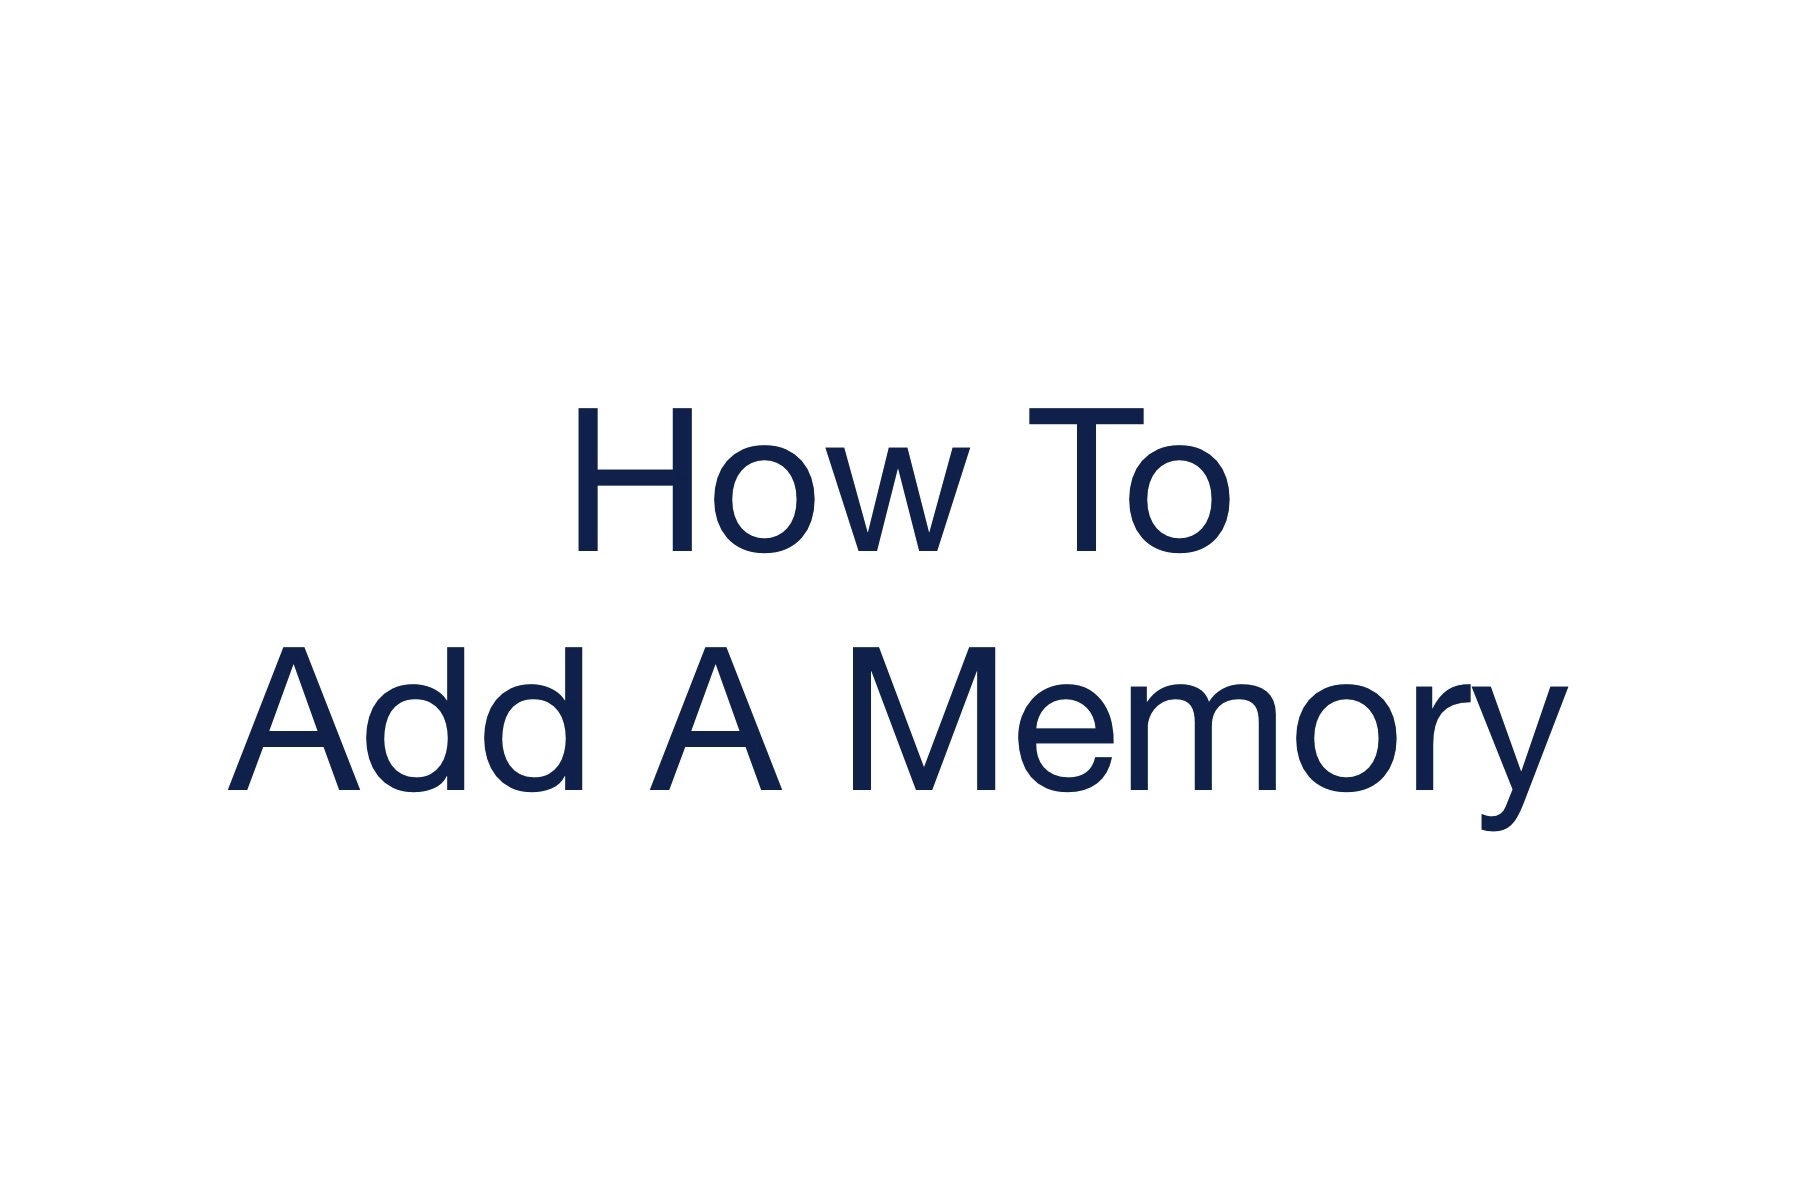 How to add a memory to the Remembered app